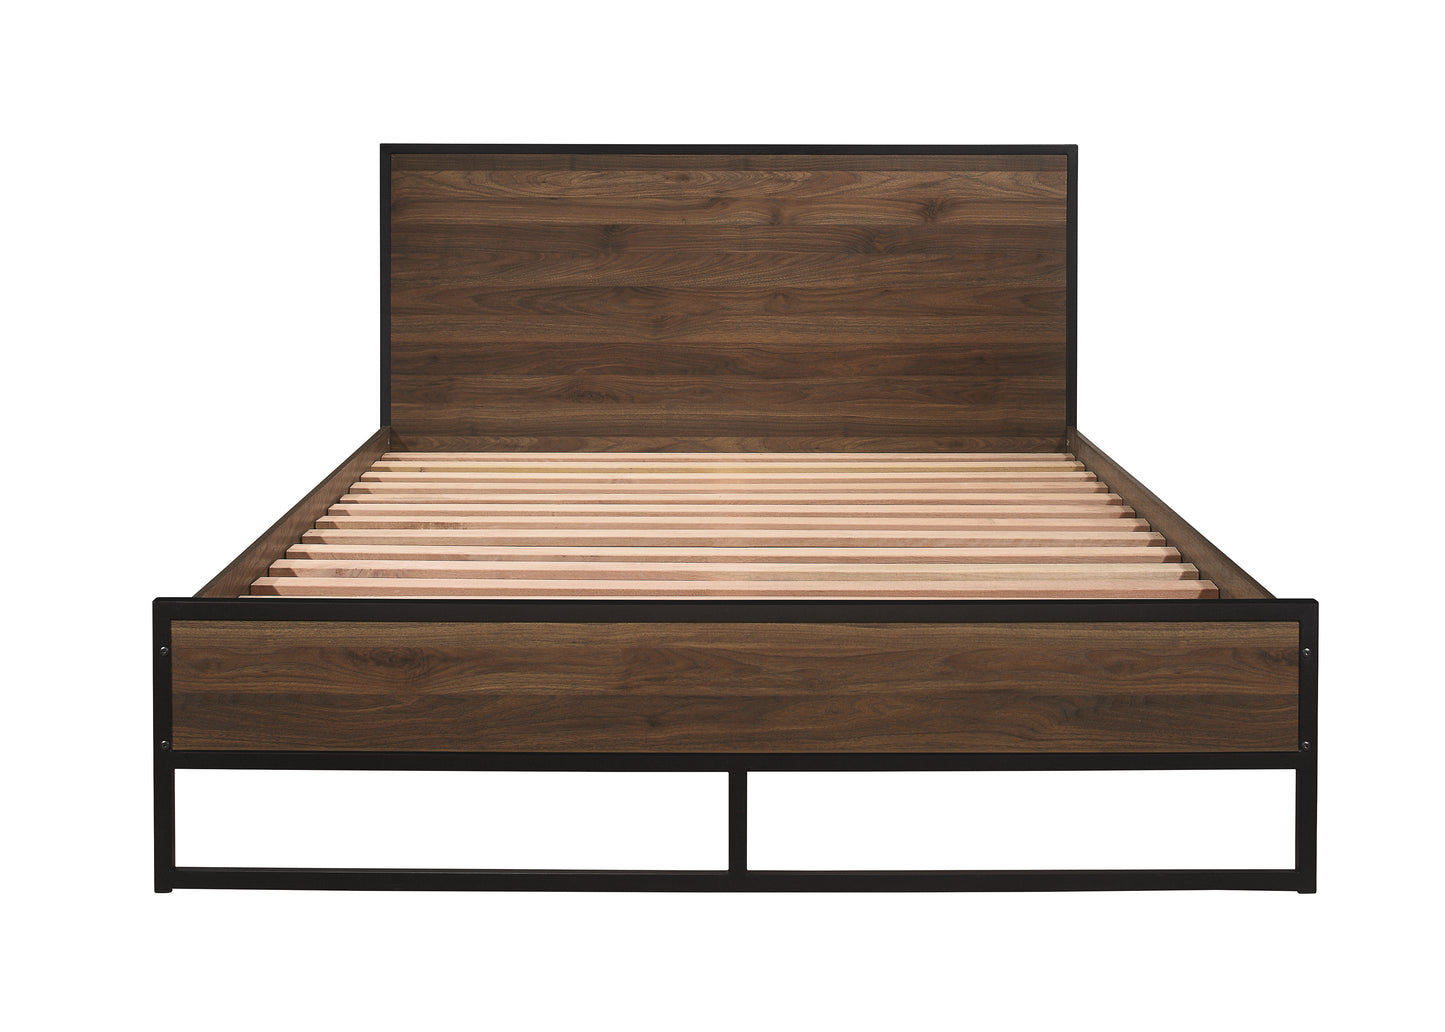 Hermione Small Double Bed - Walnut